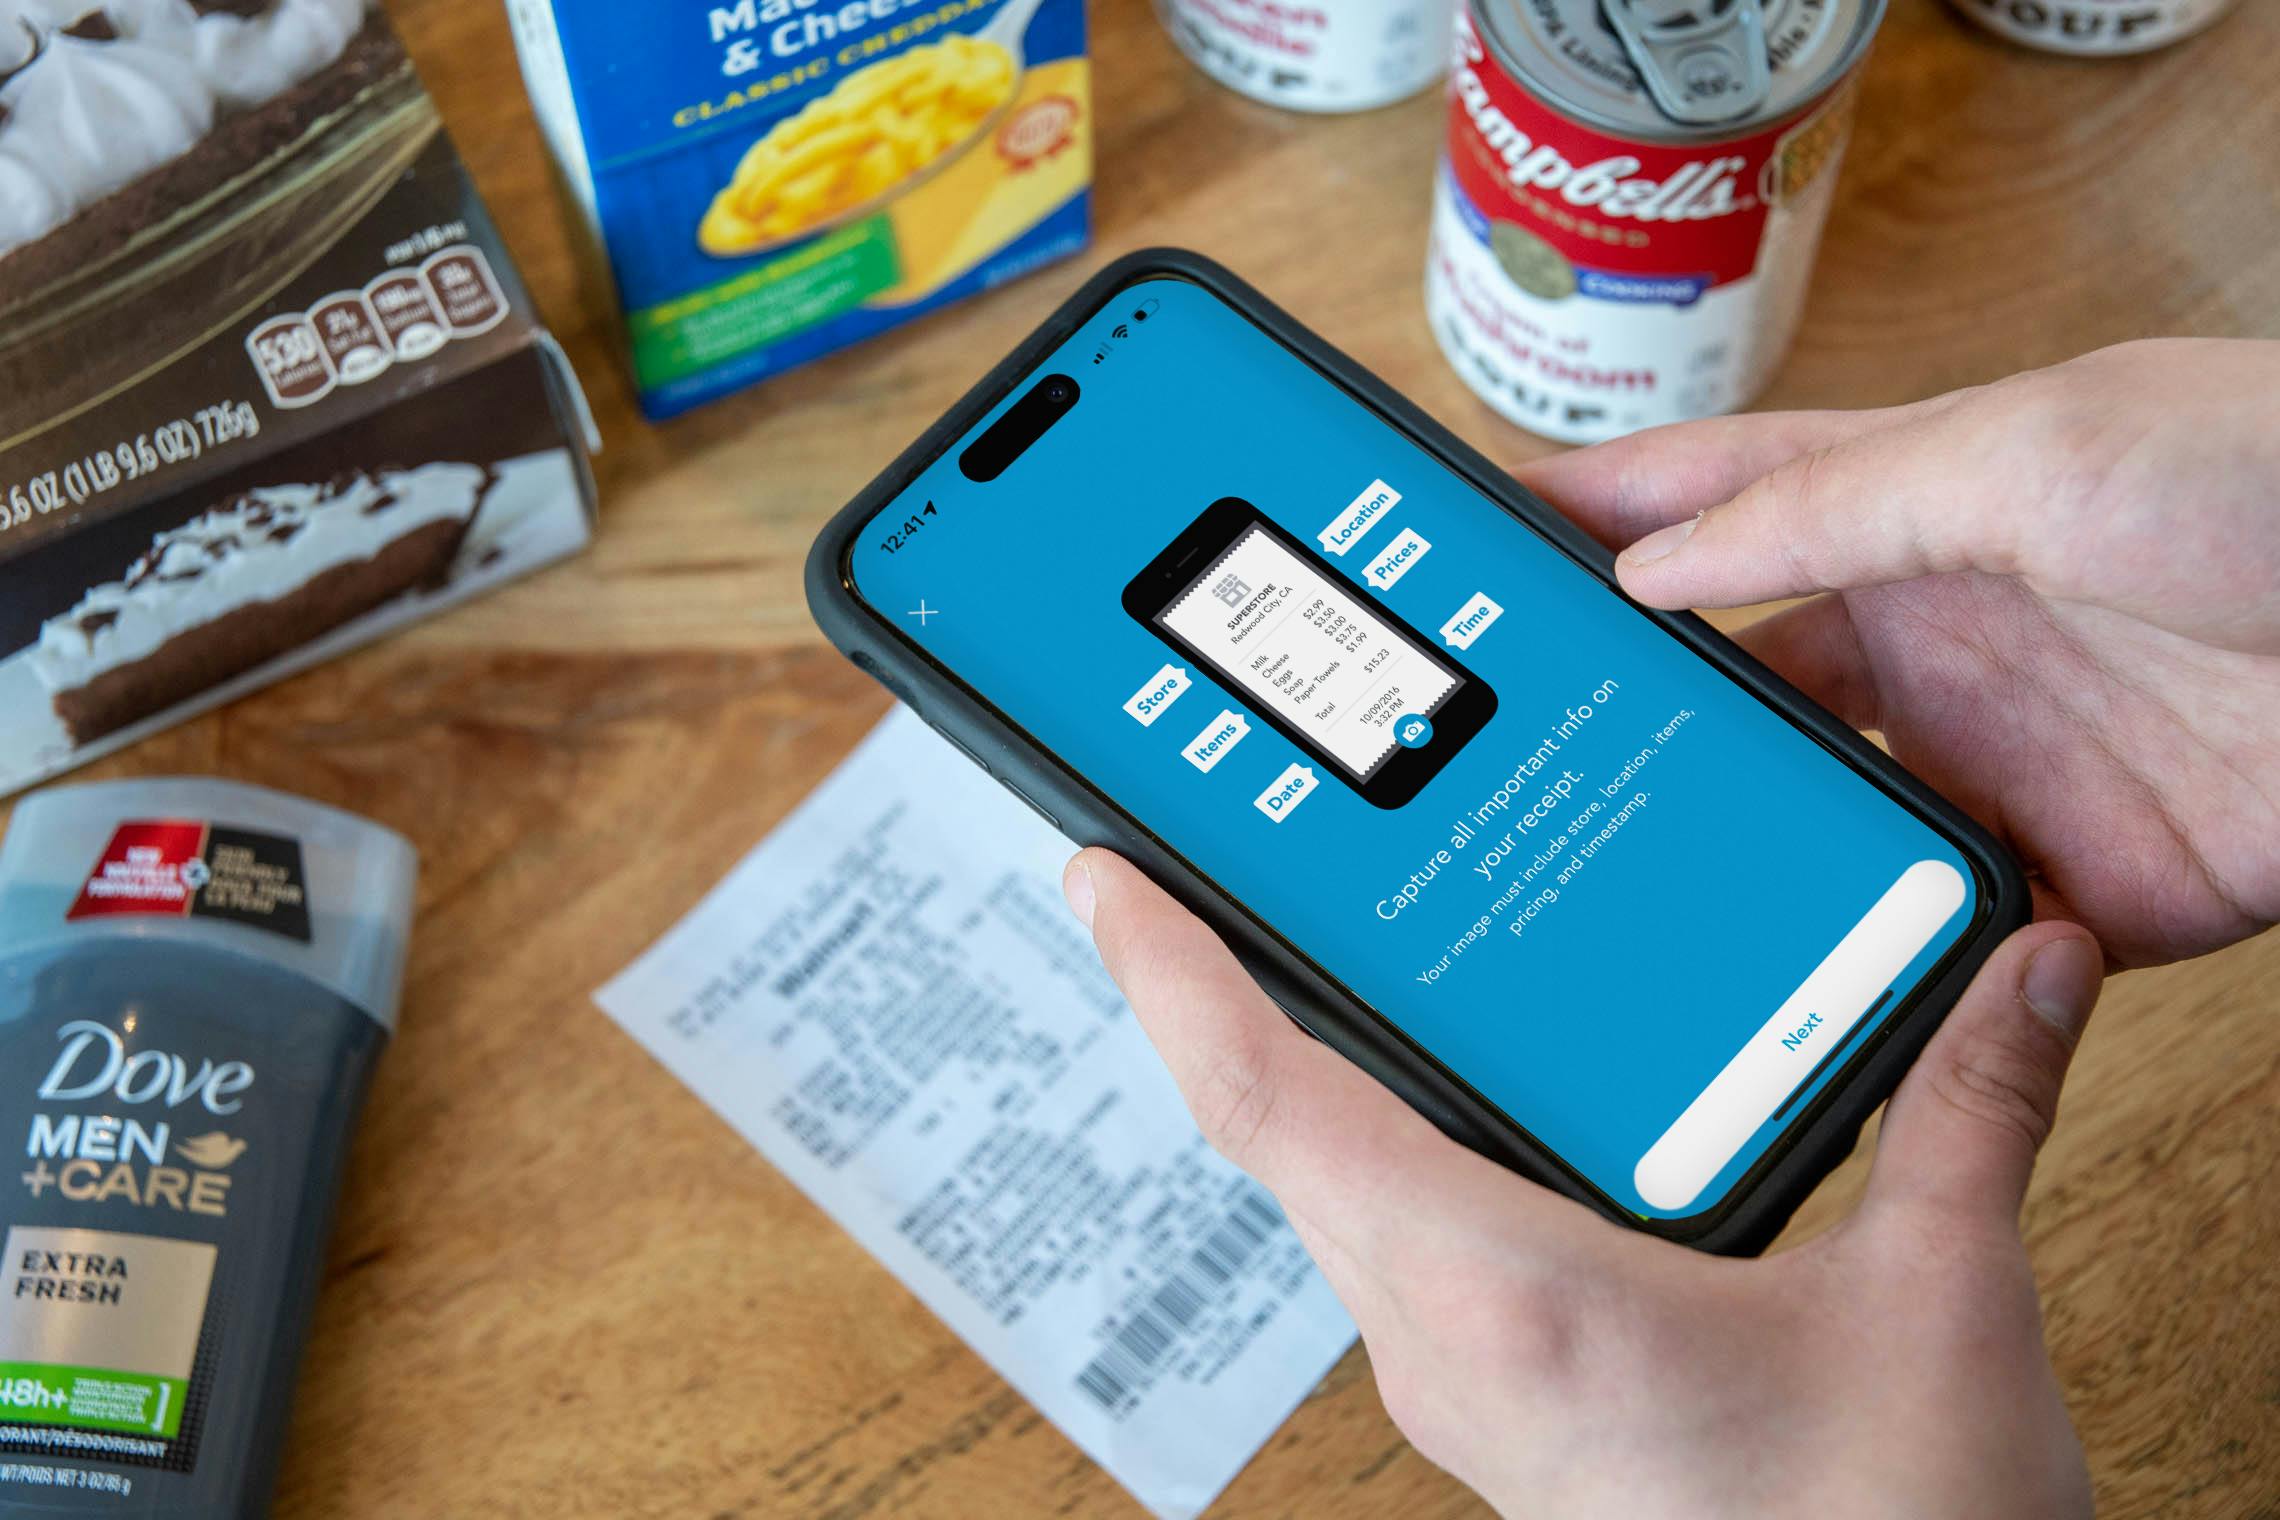 Someone about to scan a receipt with their phone using the Shopkick app